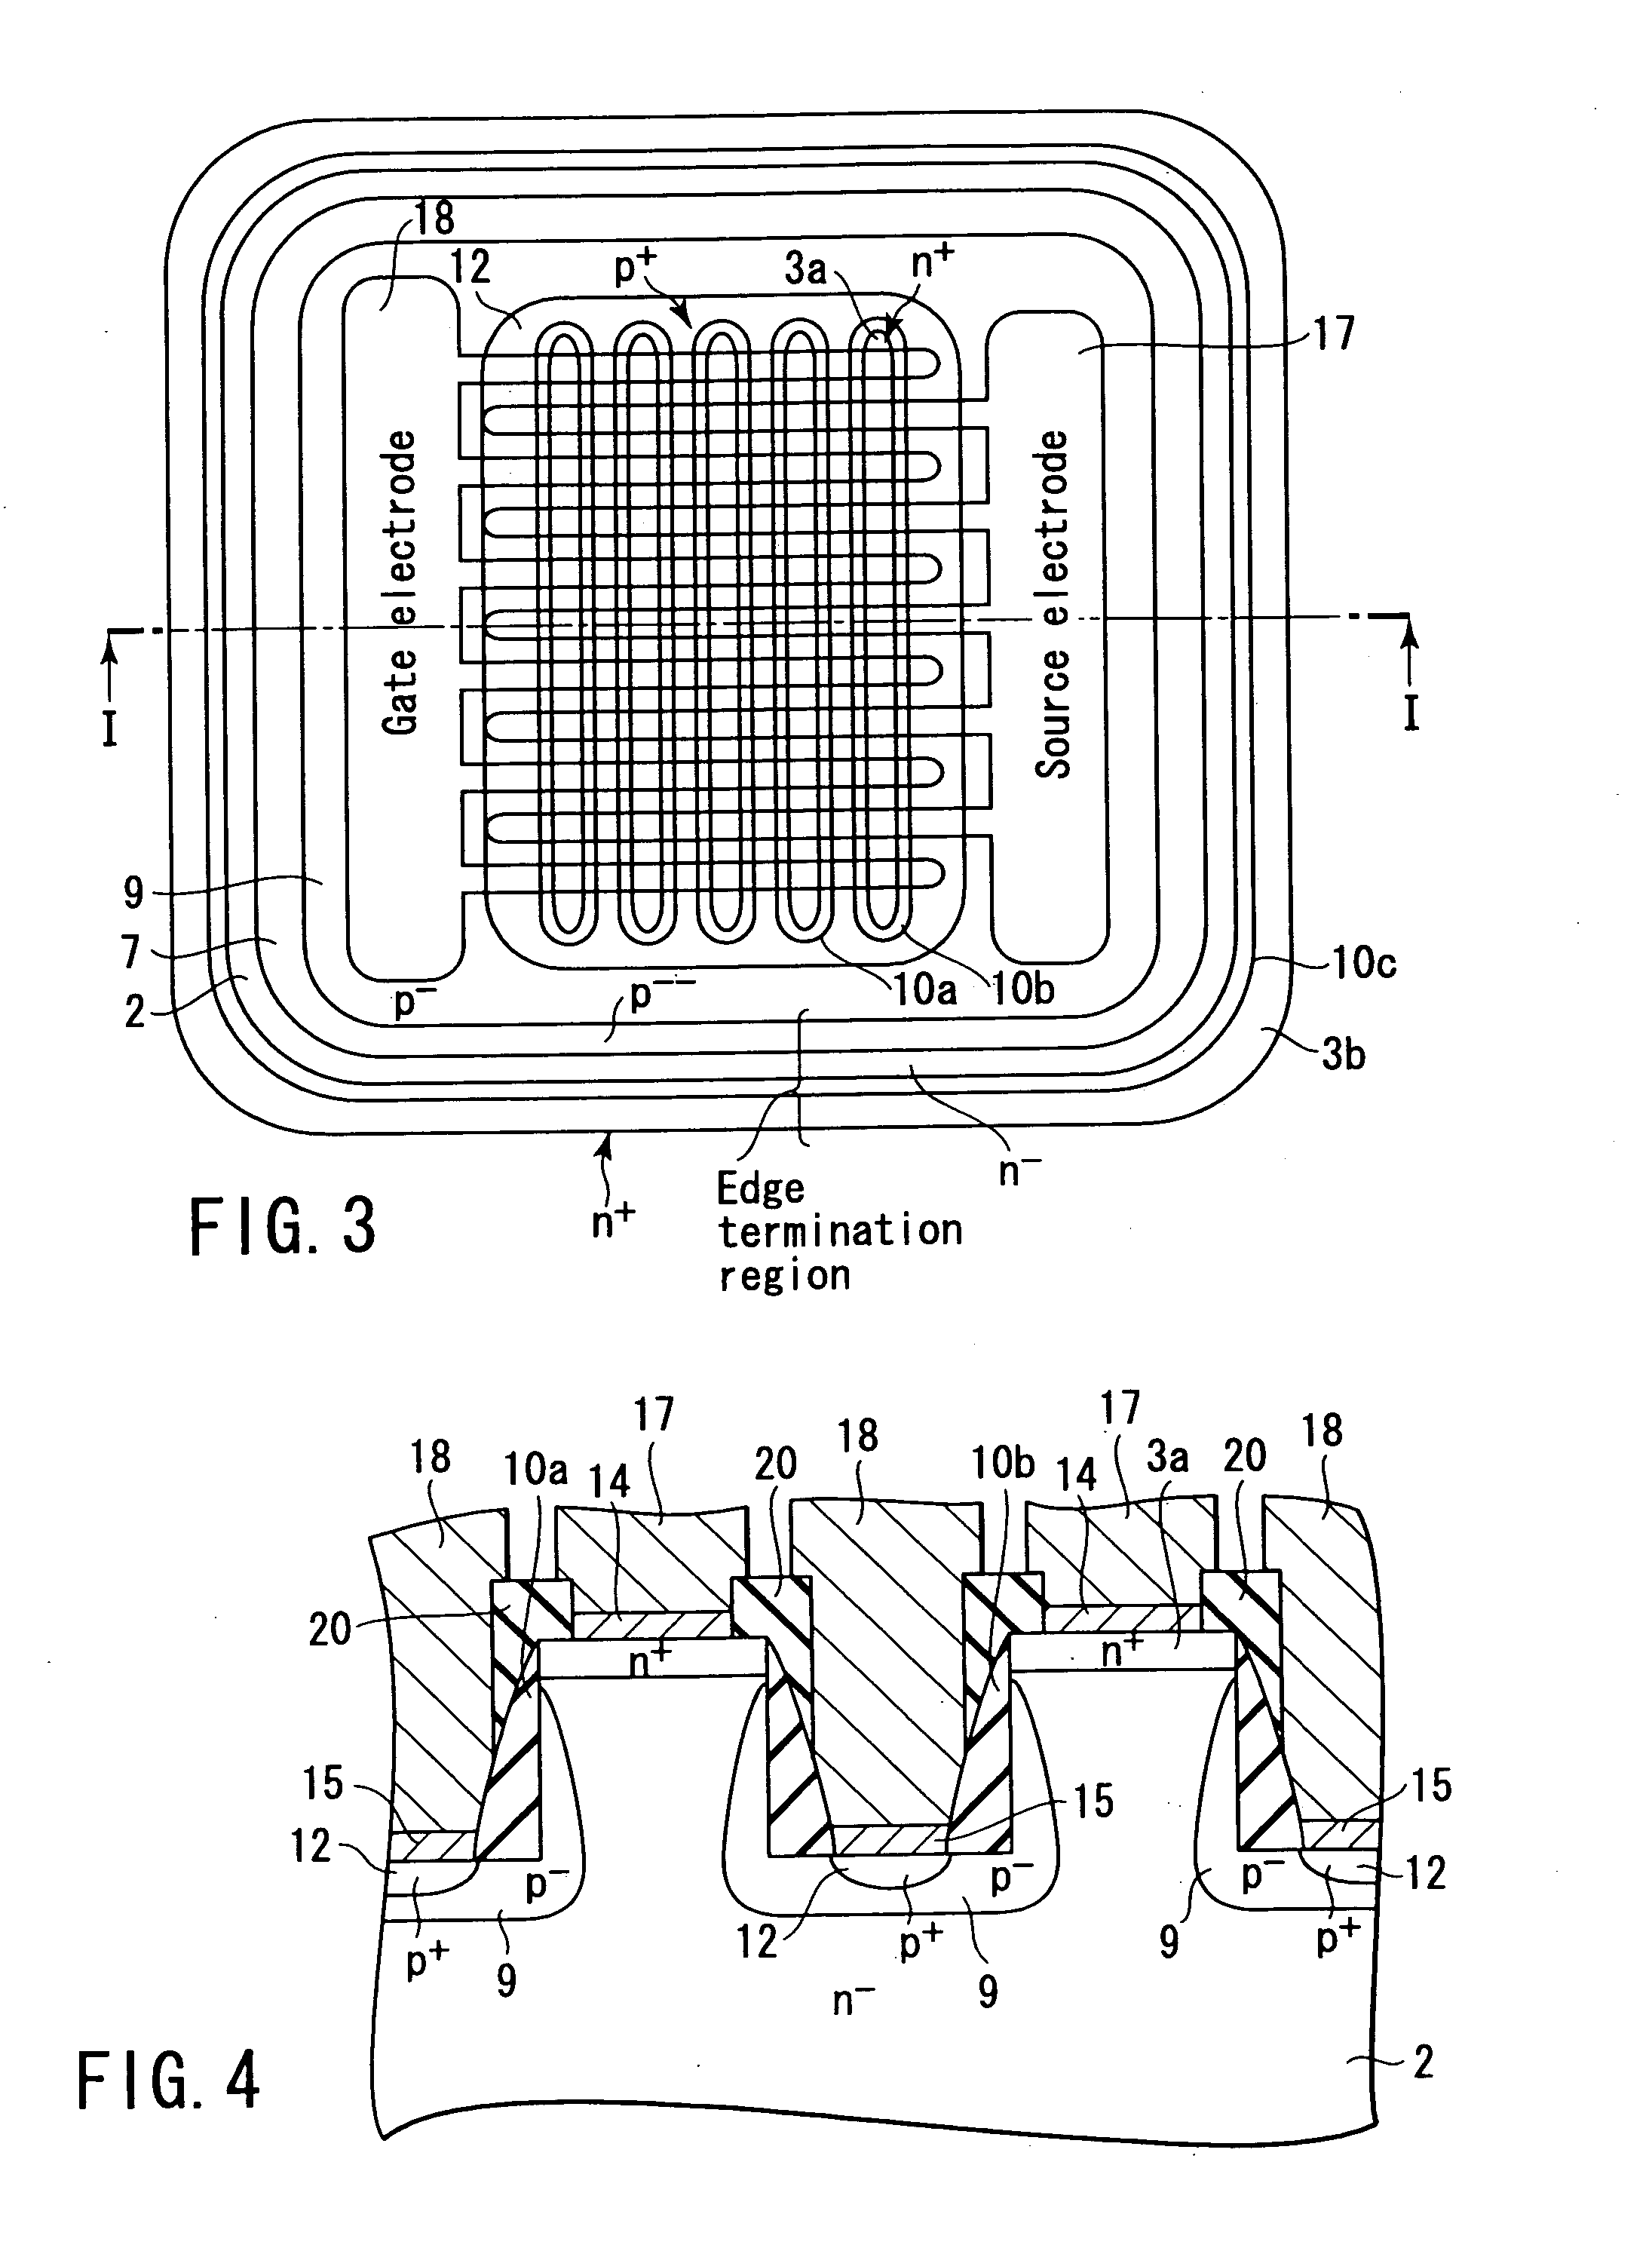 High-breakdown-voltage semiconductor device